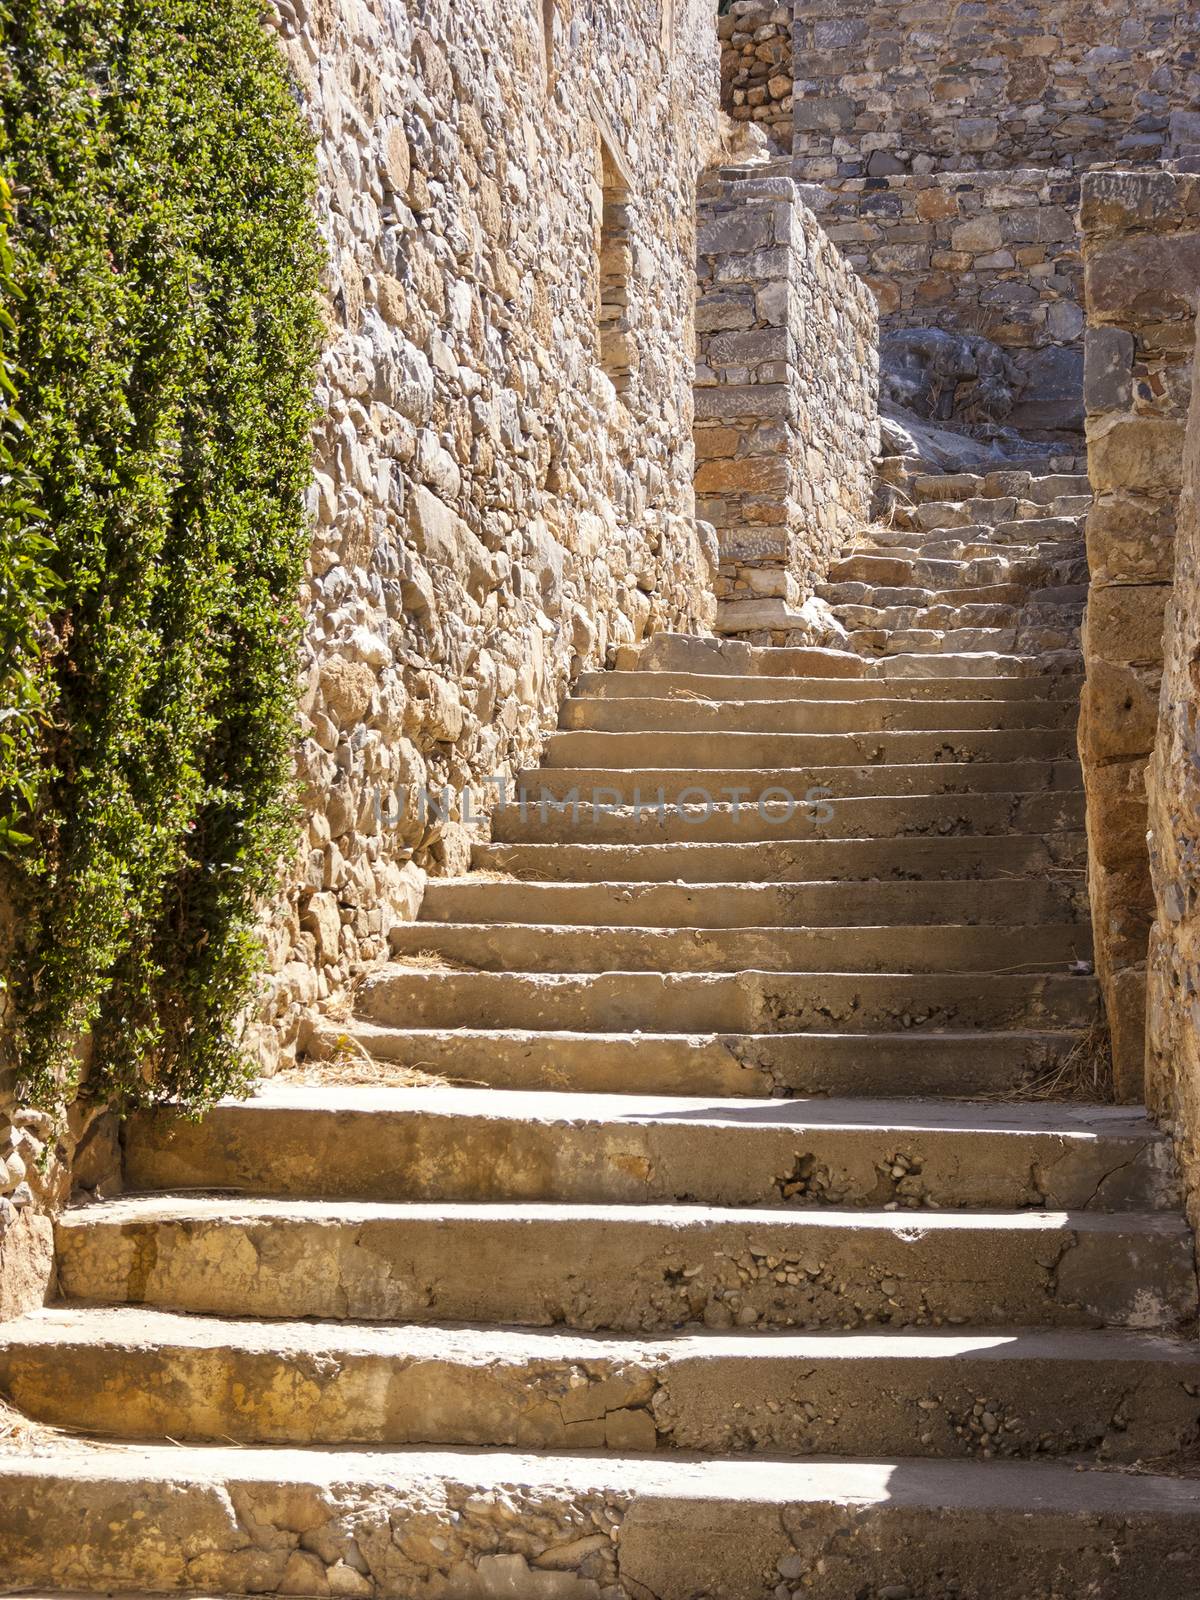 Stairs and walls in the Spinalonga island of Crete, Greece by ankarb